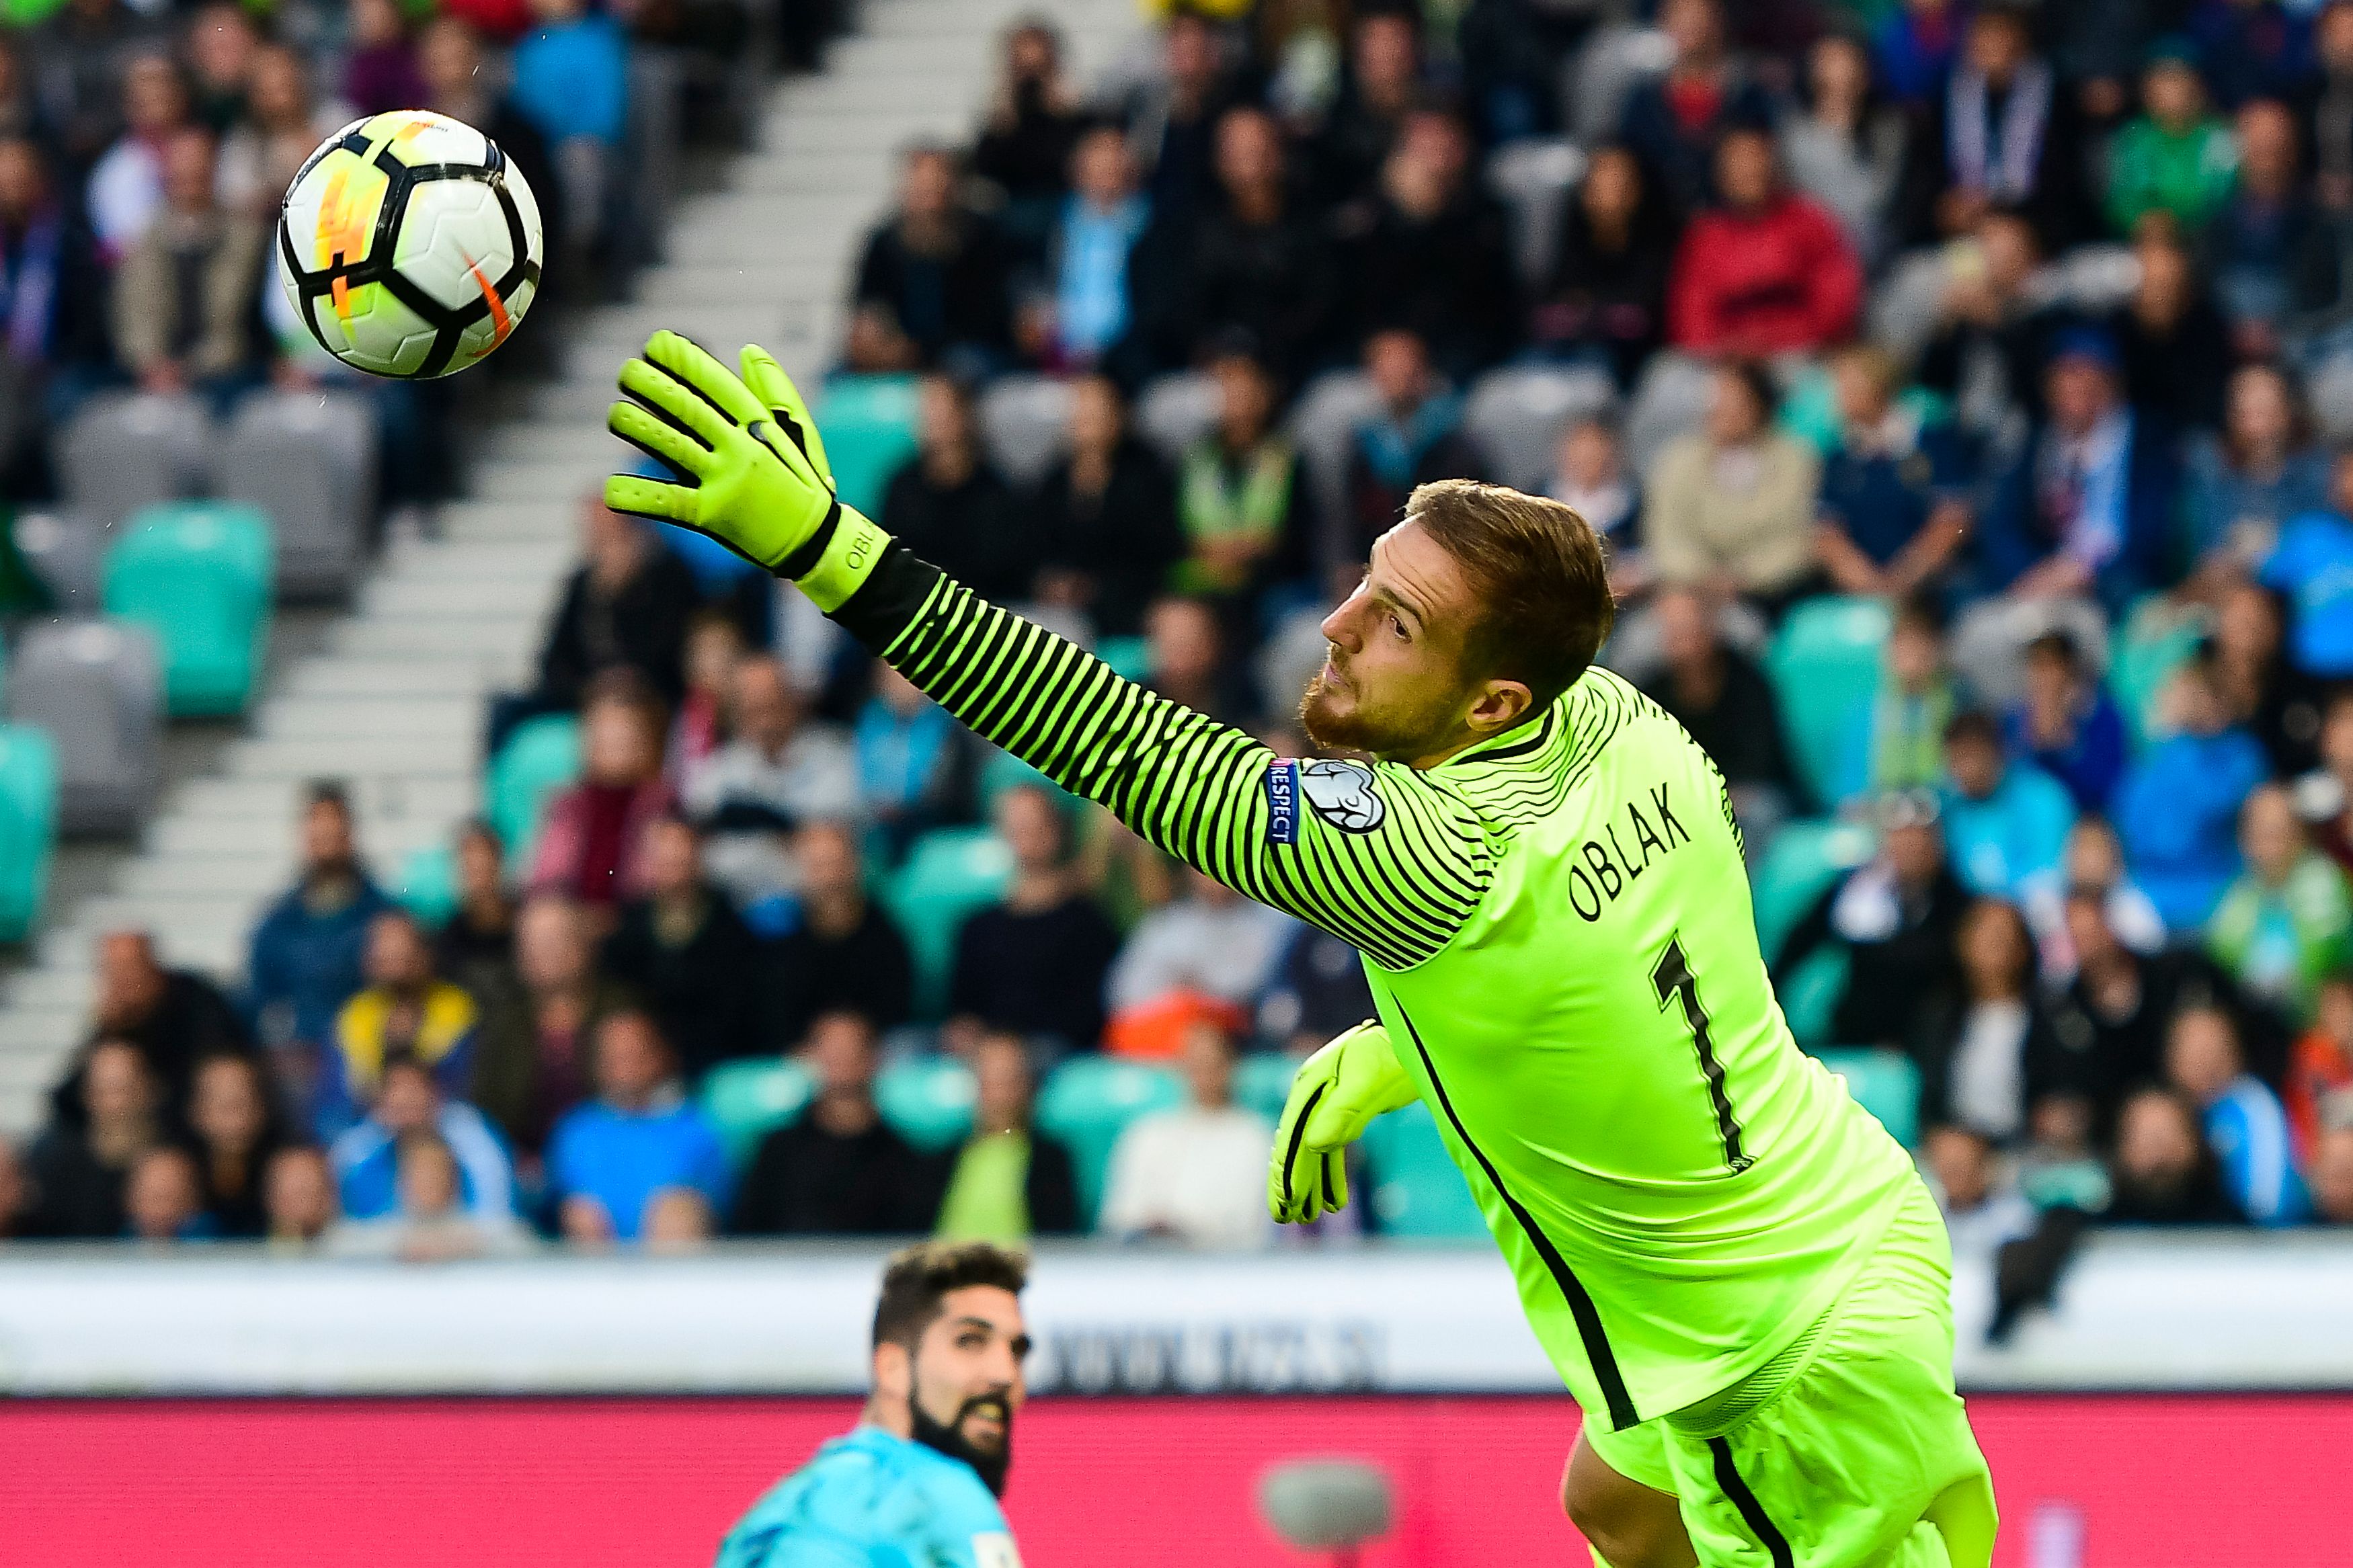 Slovenia's goalkeeper Jan Oblak goes for the save during the FIFA World Cup 2018 qualifier football match between Slovenia and Scotland at the Stozice stadium in Ljubljana, on October 8, 2017. / AFP PHOTO / Jure Makovec        (Photo credit should read JURE MAKOVEC/AFP/Getty Images)